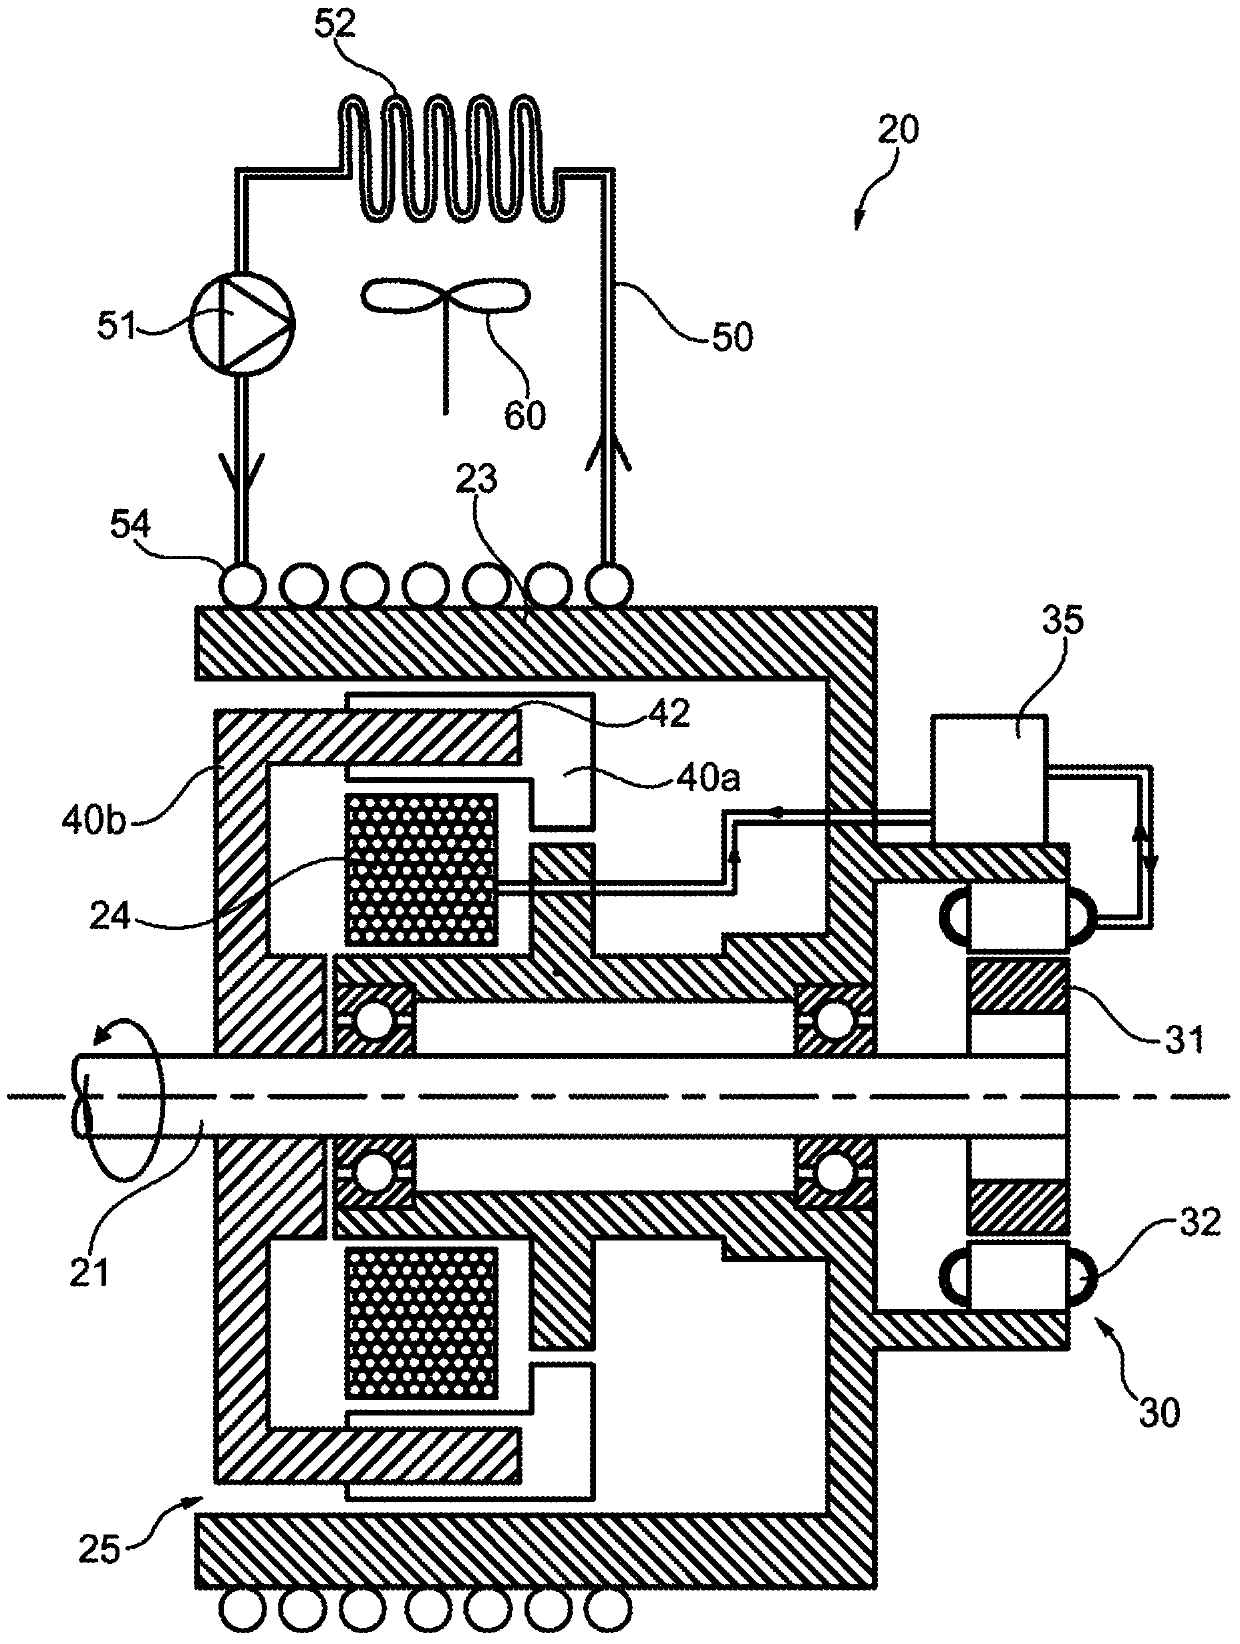 Method for draining an oil well and system for implementing said method